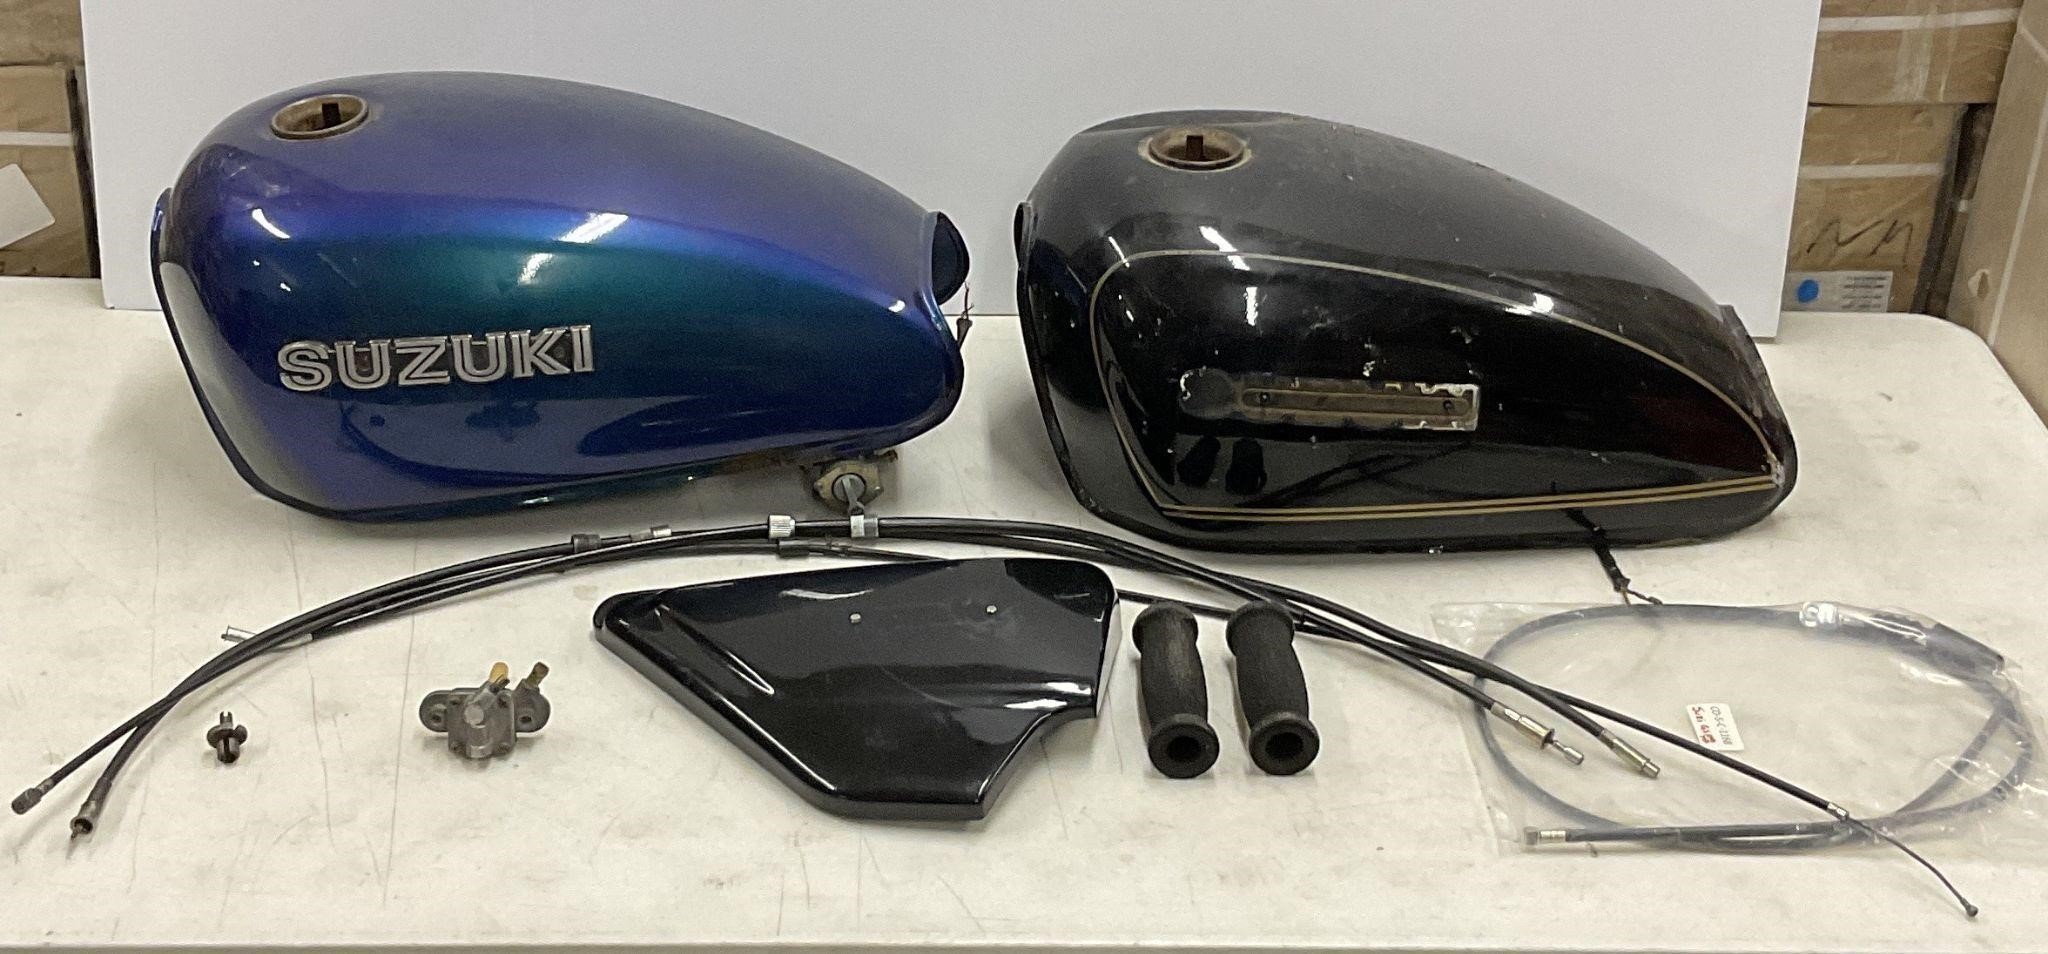 PAC CLASSIC CAR MOTORCYCLES TOOLS FIREARMS AUCTION